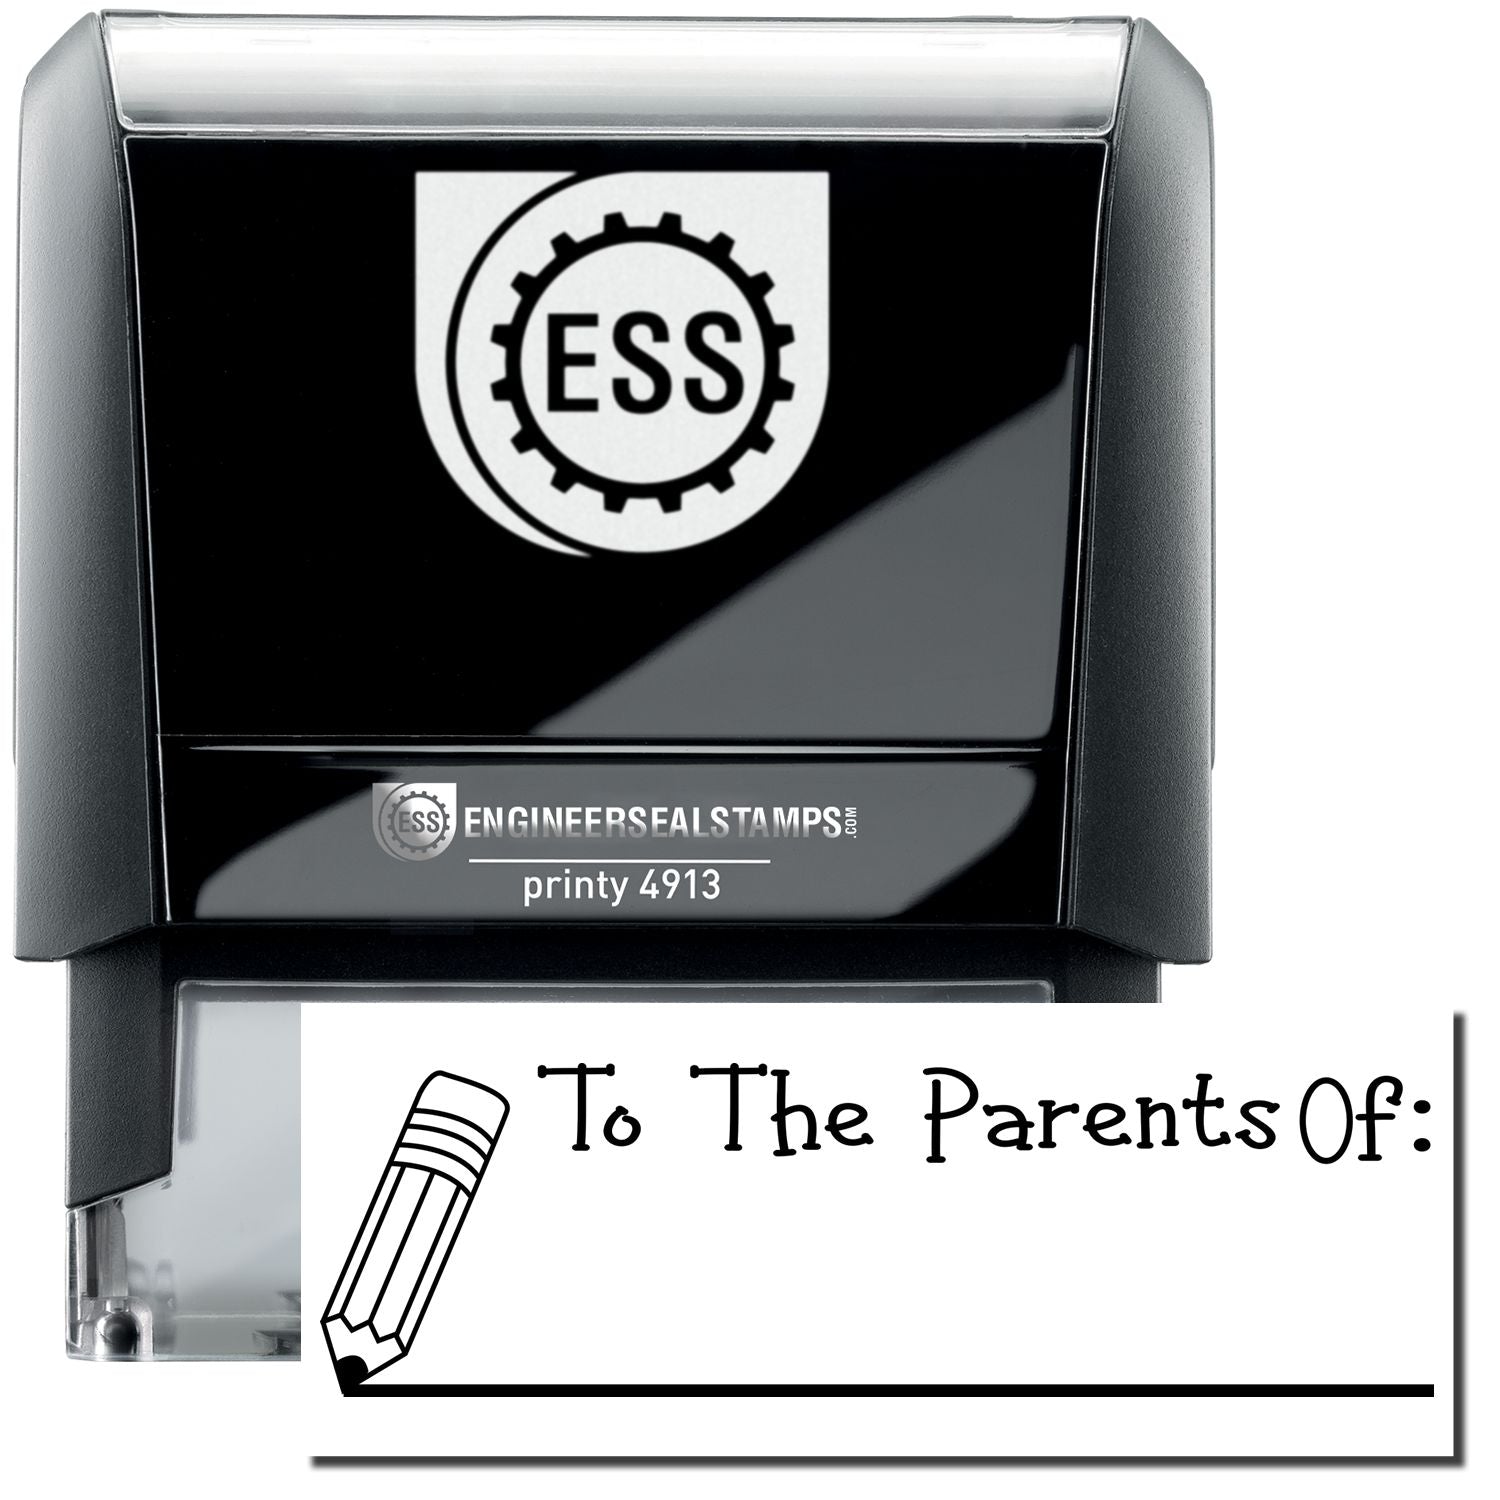 A self-inking stamp with a stamped image showing how the text "To The Parents Of:" in a large unique font with a line under the text (displaying a pencil to show that the line was drawn with a pencil) is displayed by it after stamping.